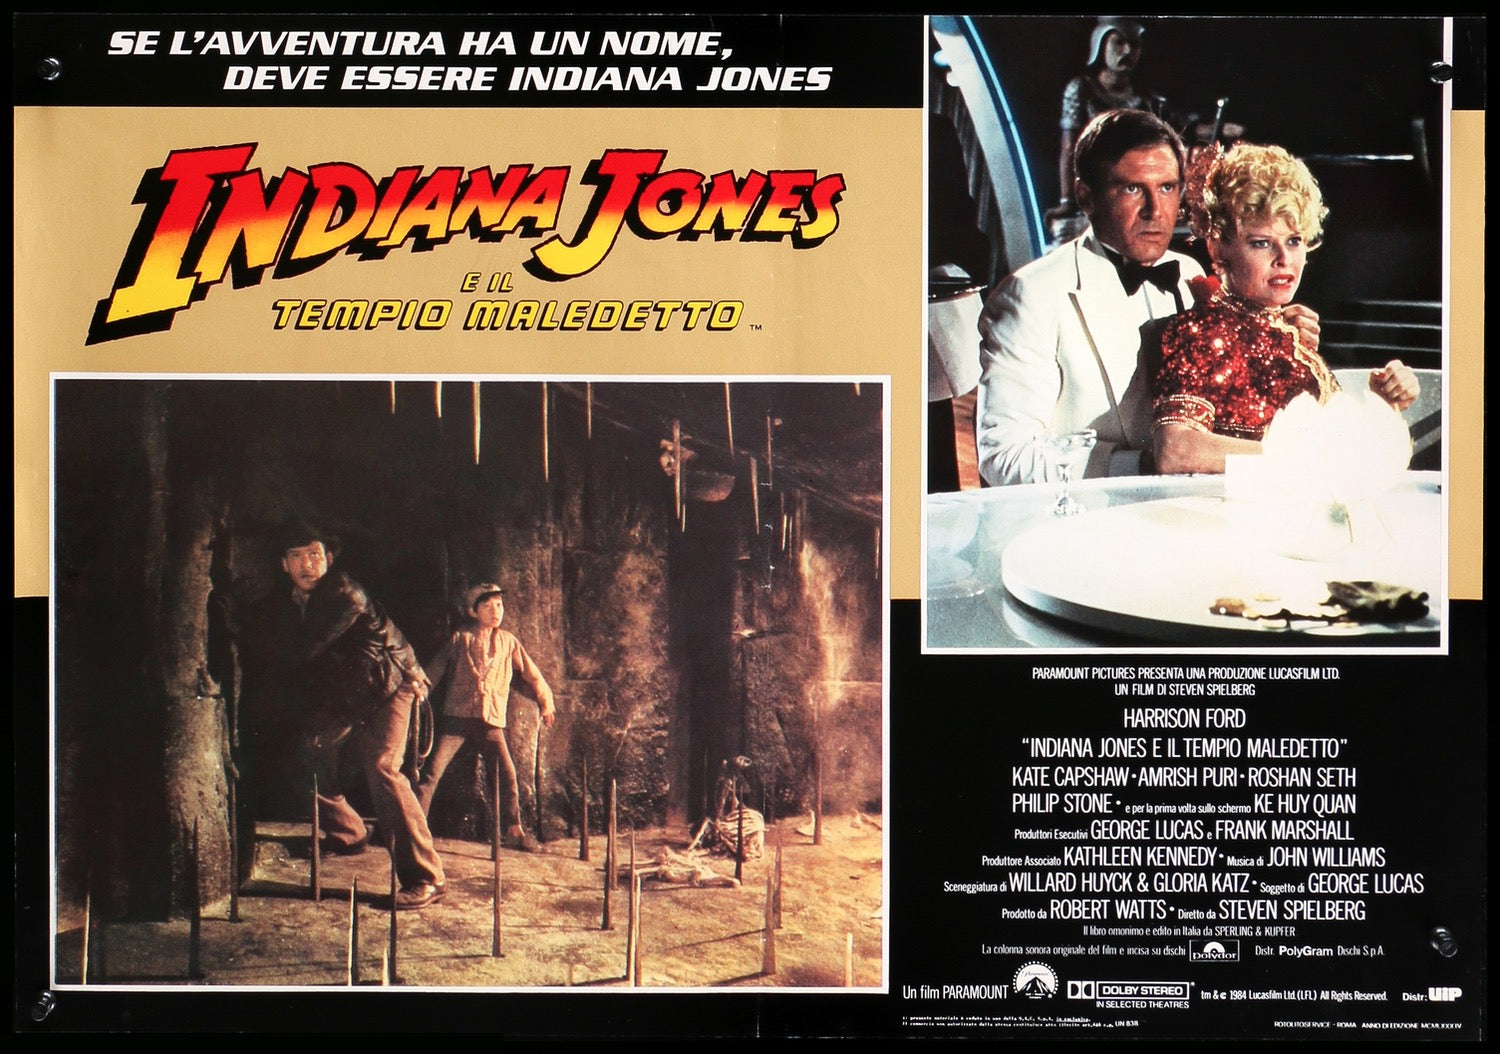 Indiana Jones and the Temple of Doom Movie Poster 1984 1 Sheet